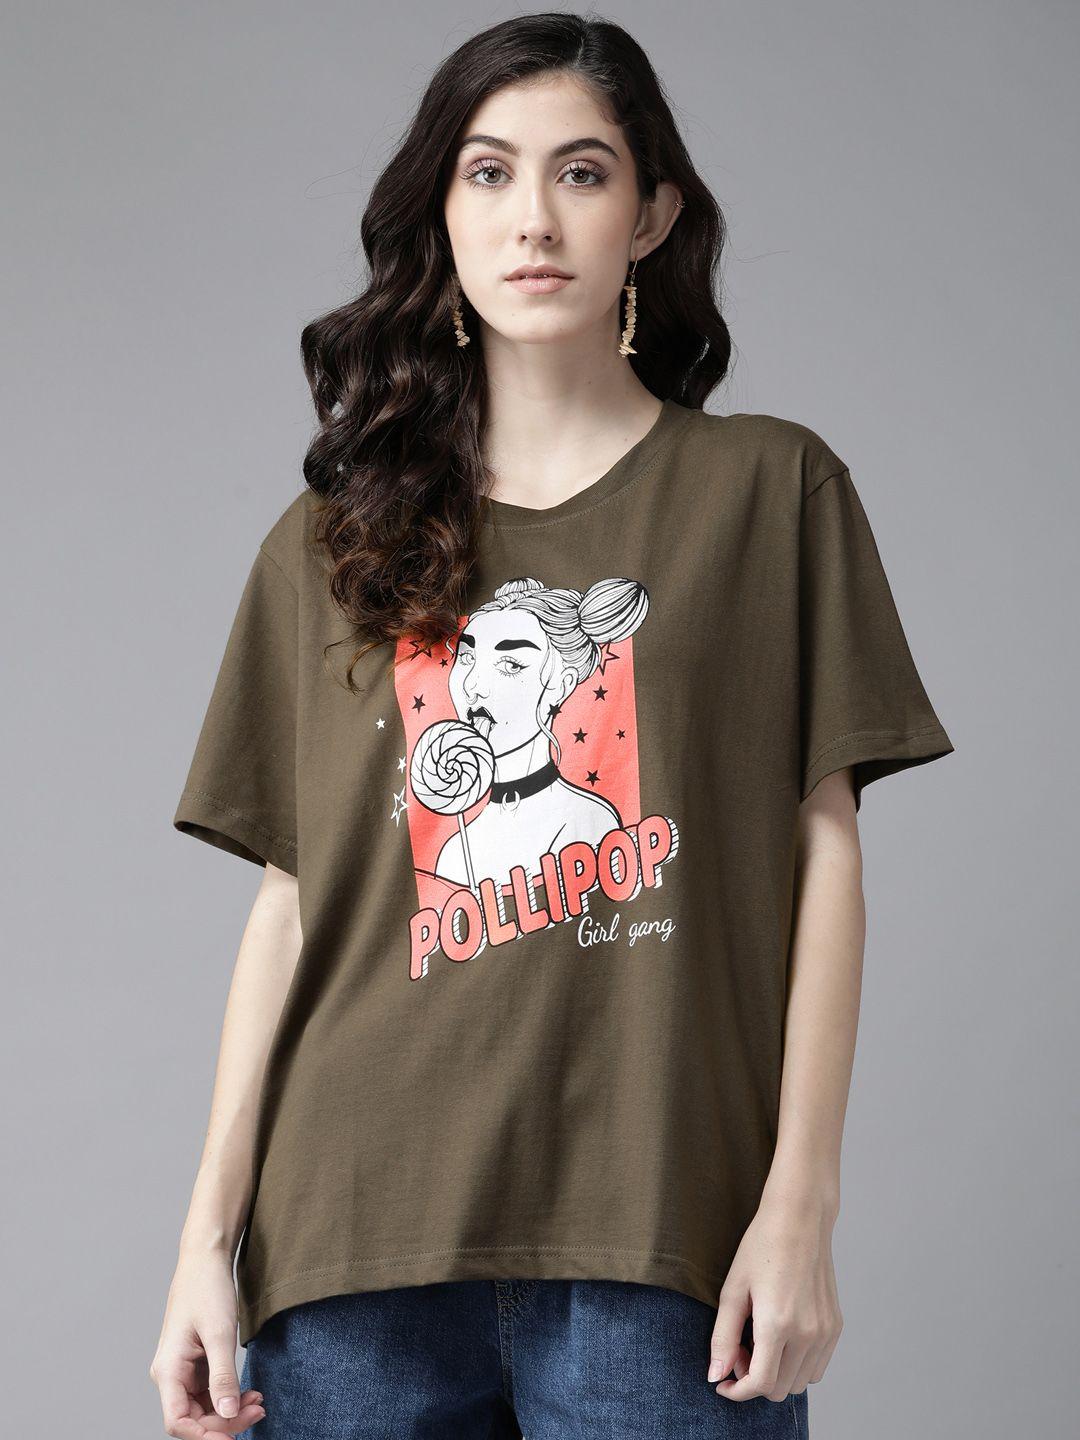 the-dry-state-women-olive-green-&-white-cotton-printed-oversized-t-shirt